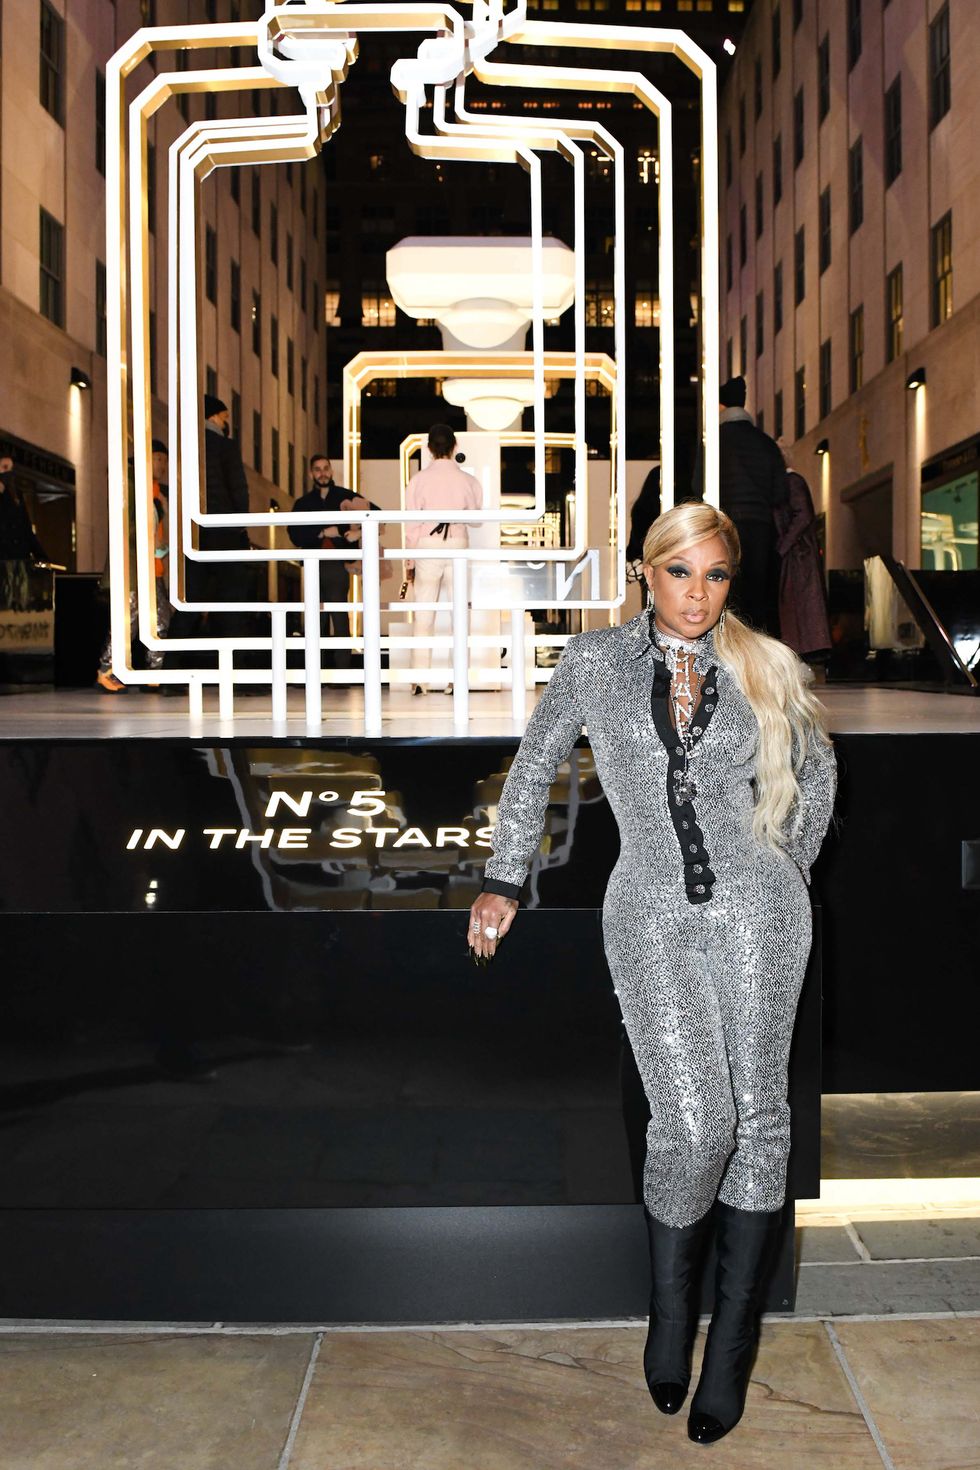 Chanel Celebrated 100 Years of Chanel N°5 With a Surprise Mary J. Blige  Performance